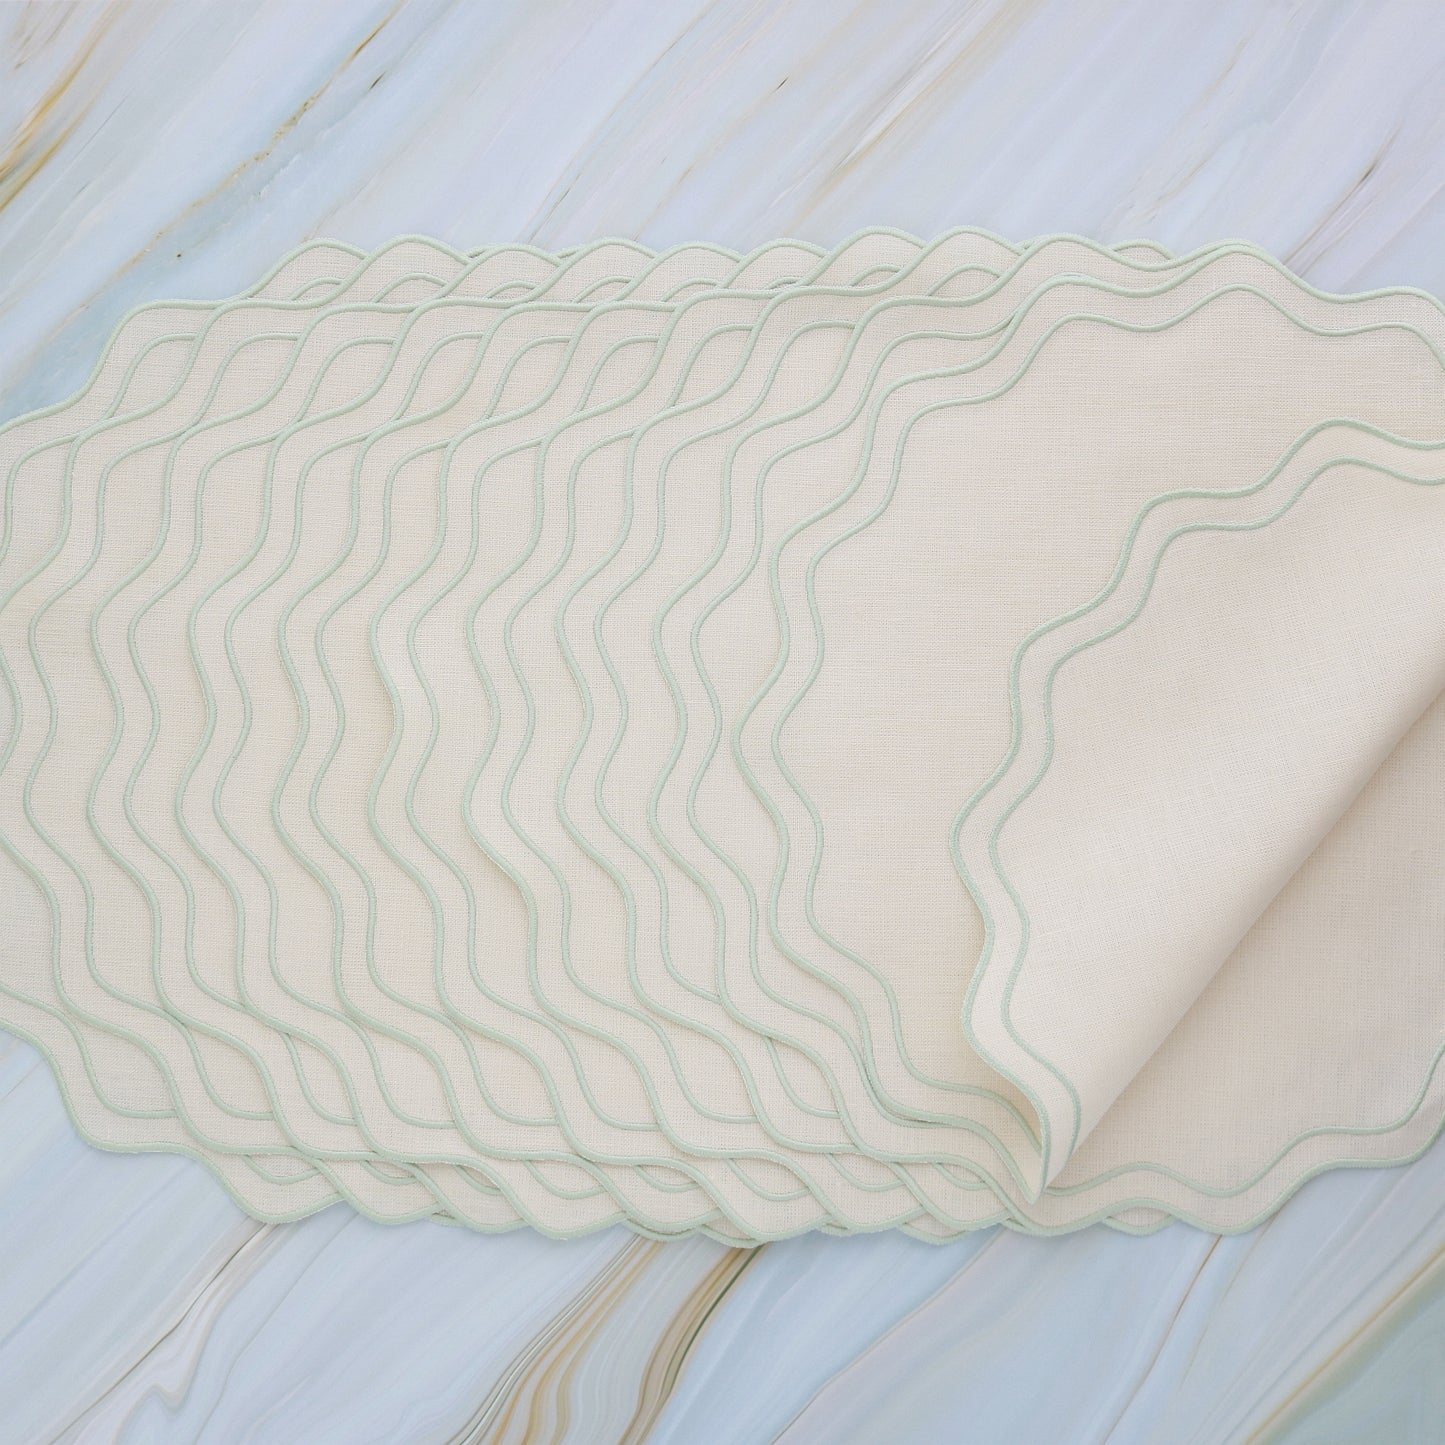 Ecru and Mint Green wave border placemats (set of 4)